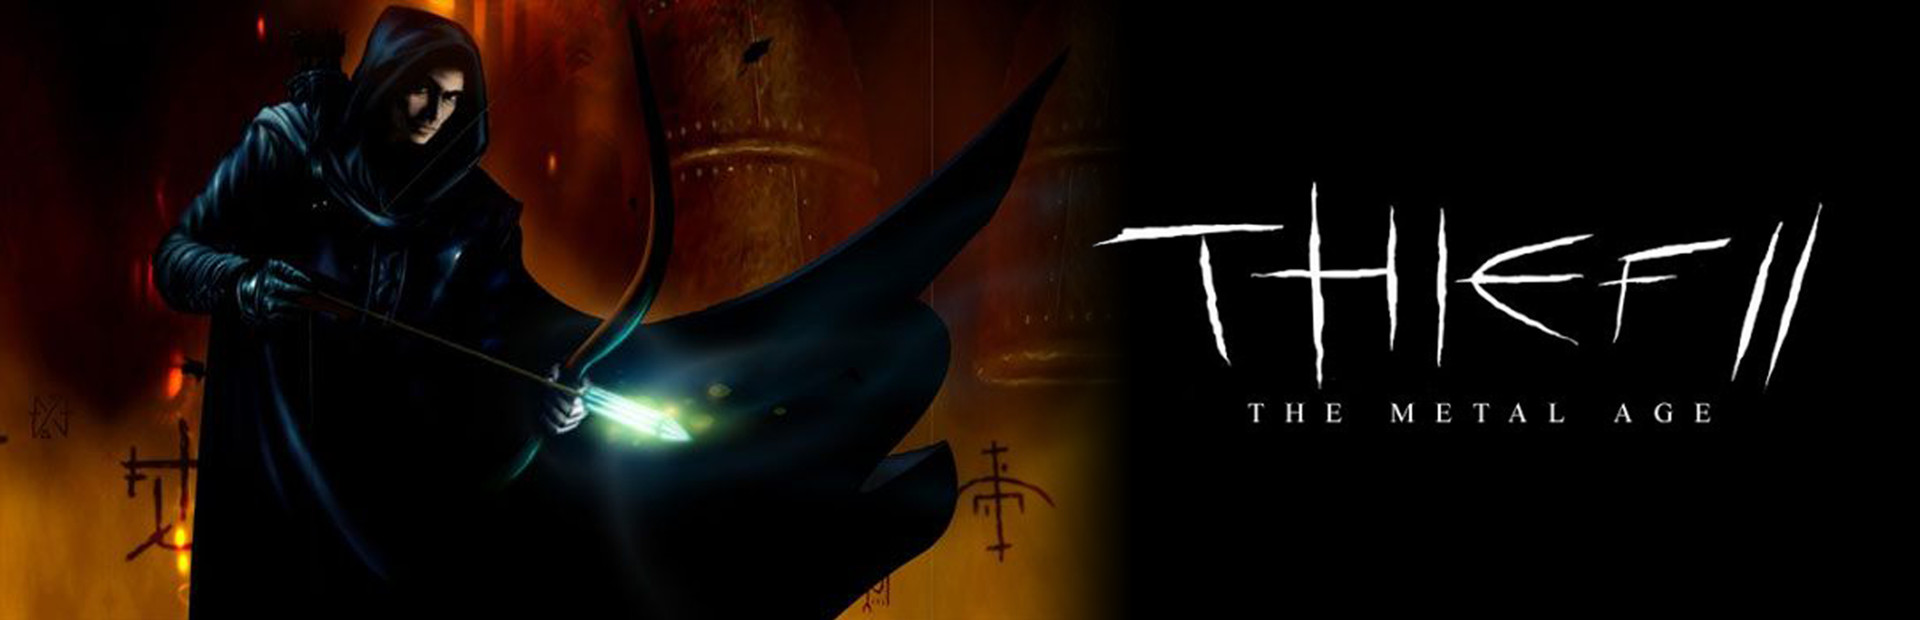 Thief™ II: The Metal Age cover image